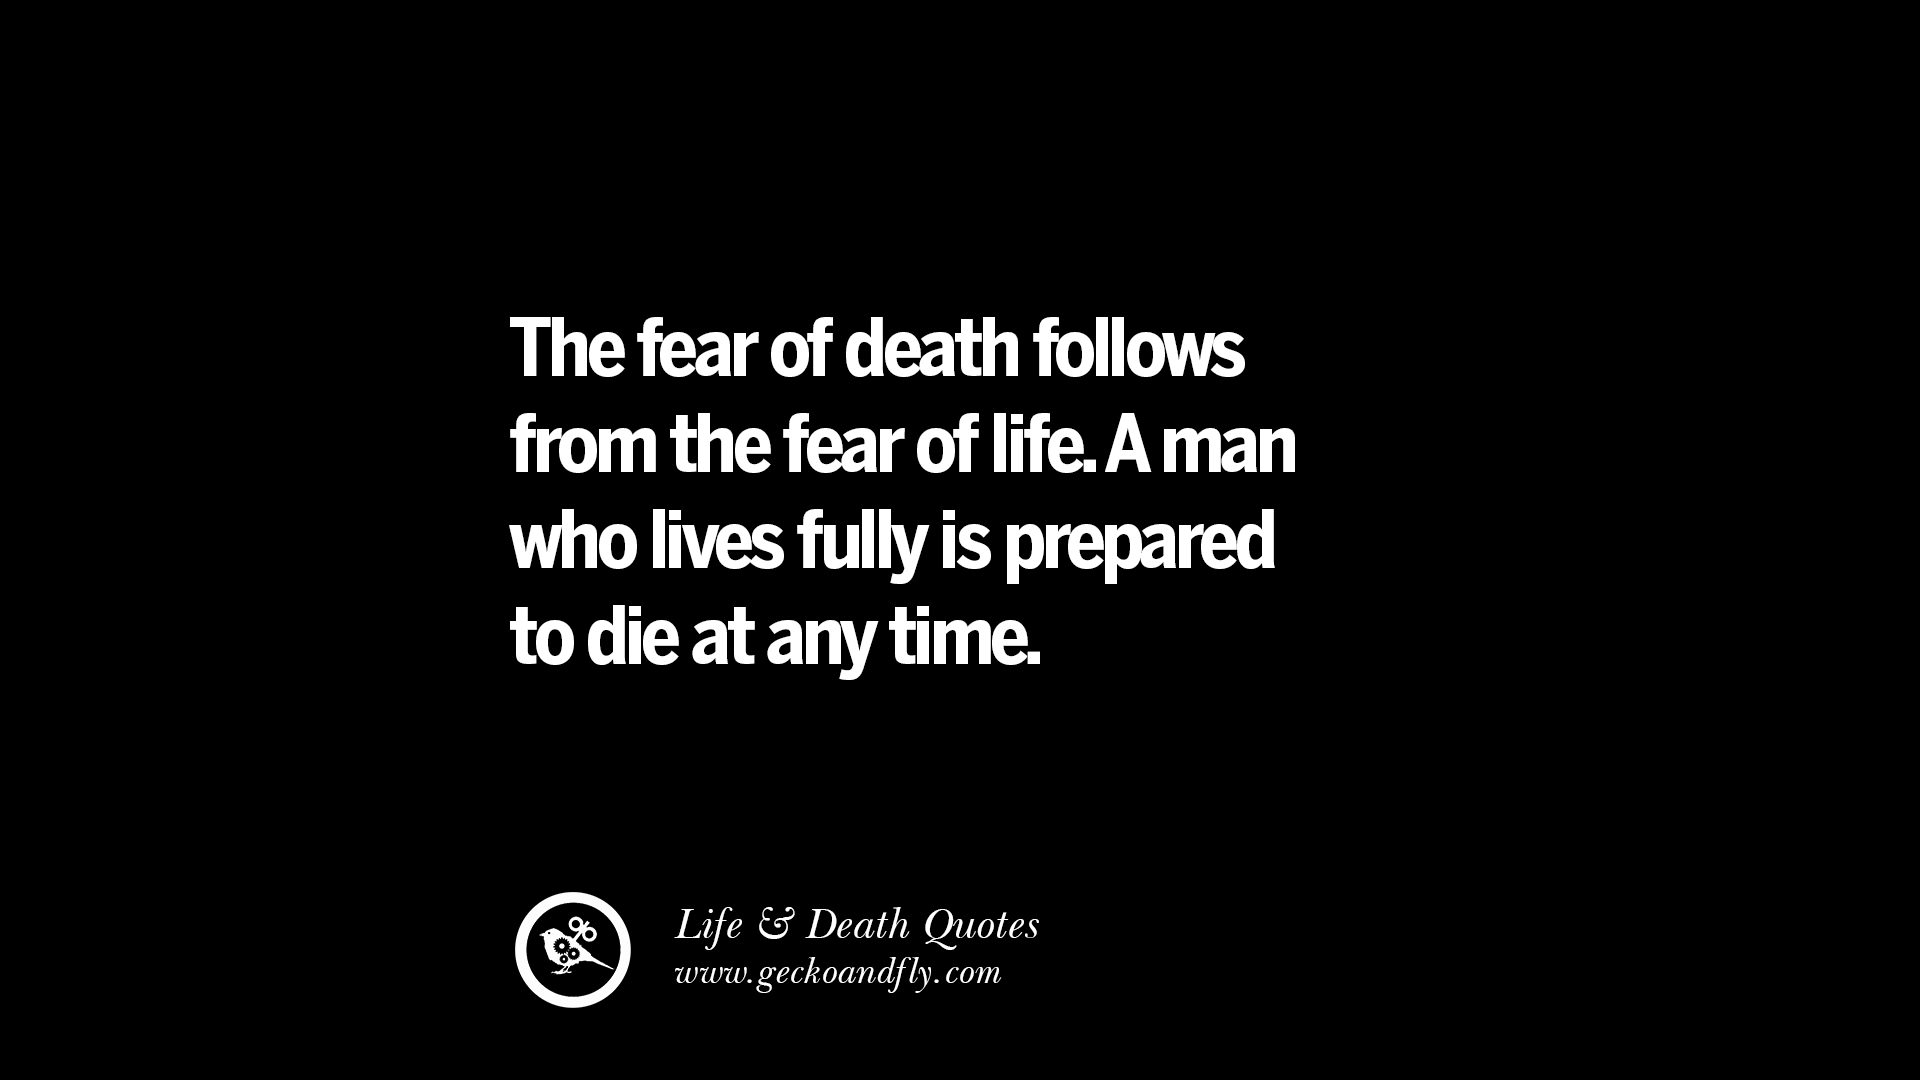 the fear of death follows from the fear of life. a man who lives fully is prepared to die at any time